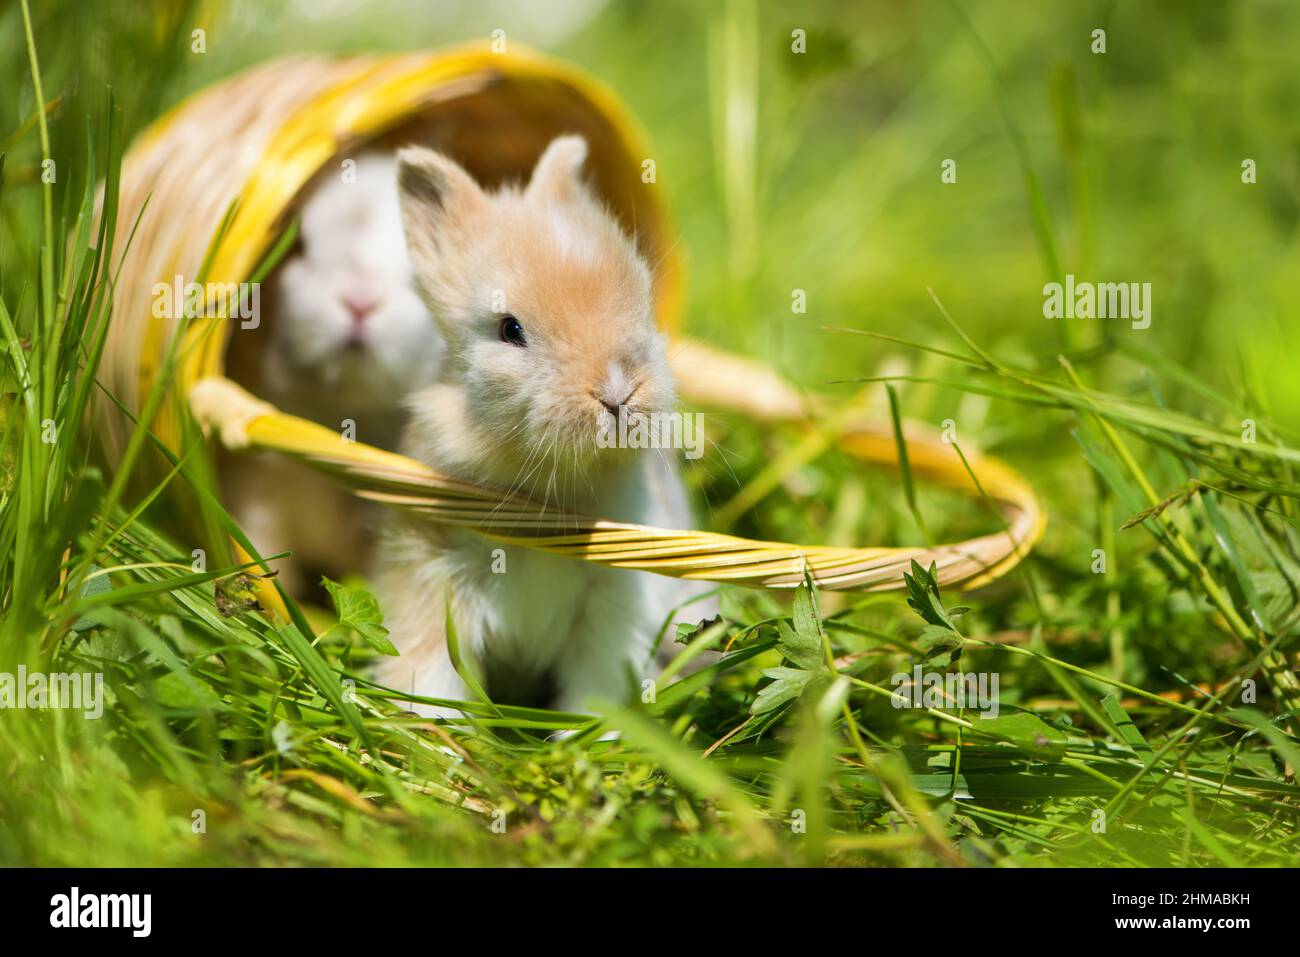 Cute young rabbits in a meadow Stock Photo